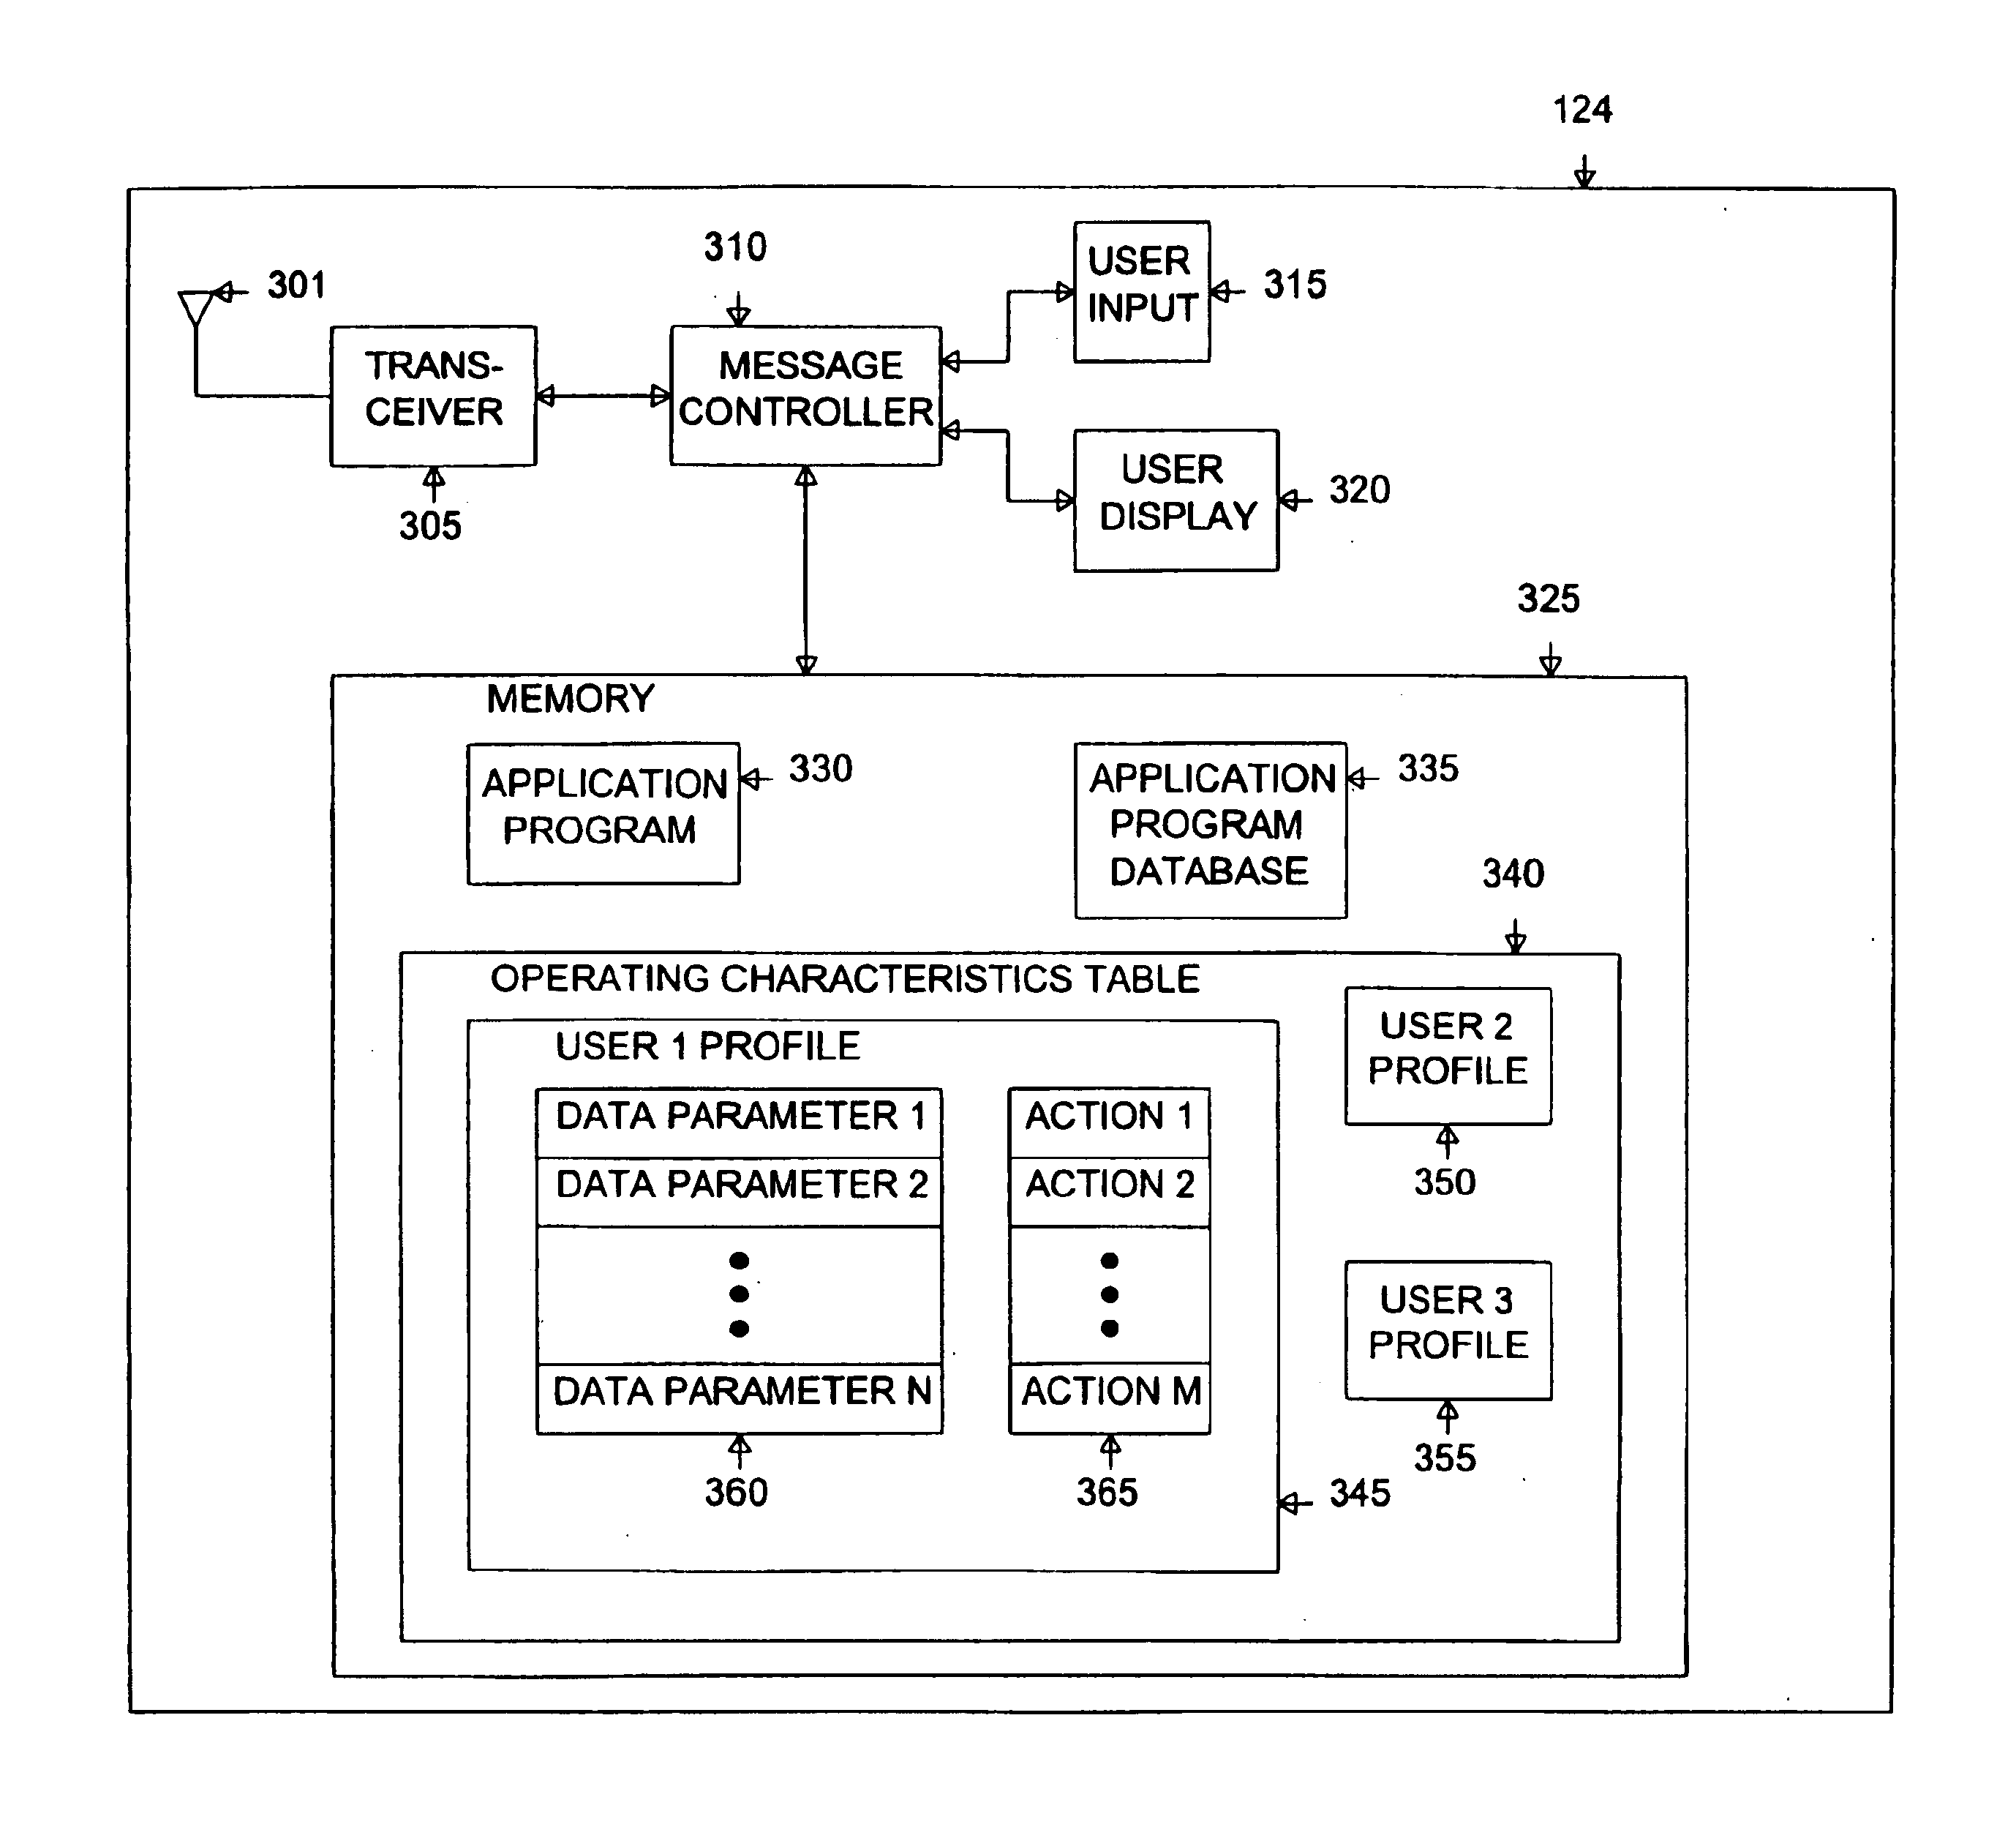 System and method for controlling an end-user application among a plurality of communication units in a wireless messaging network